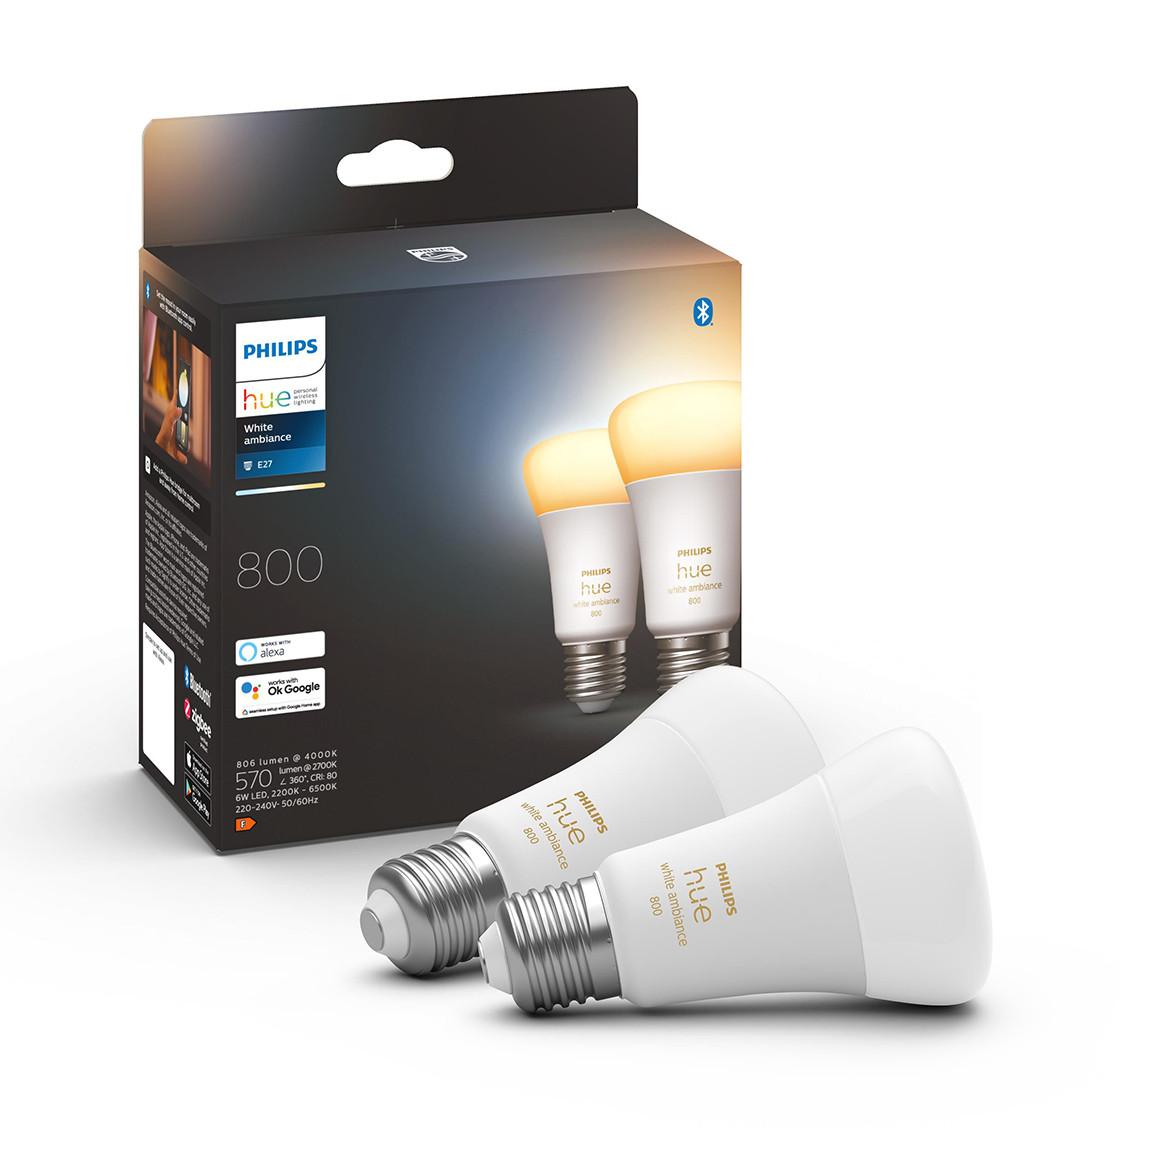 Philips Hue White Ambiance E27 Bluetooth 2er-Set - LED-Lampe Verpackung